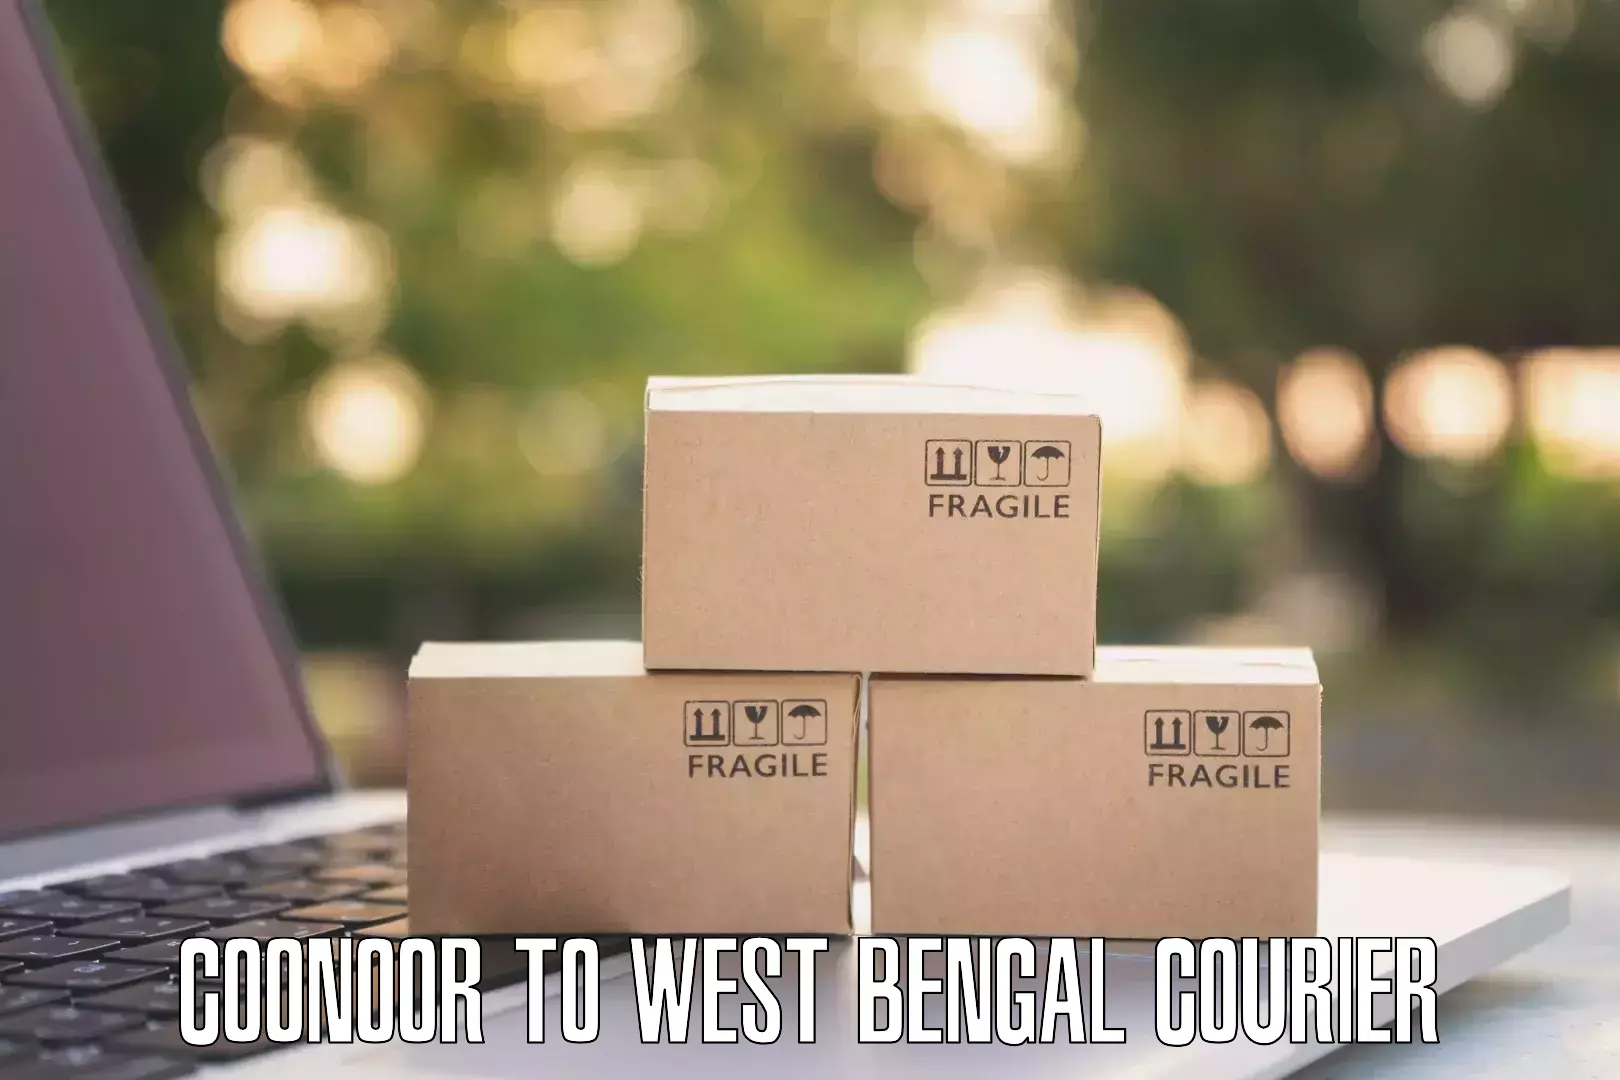 Discounted shipping Coonoor to West Bengal